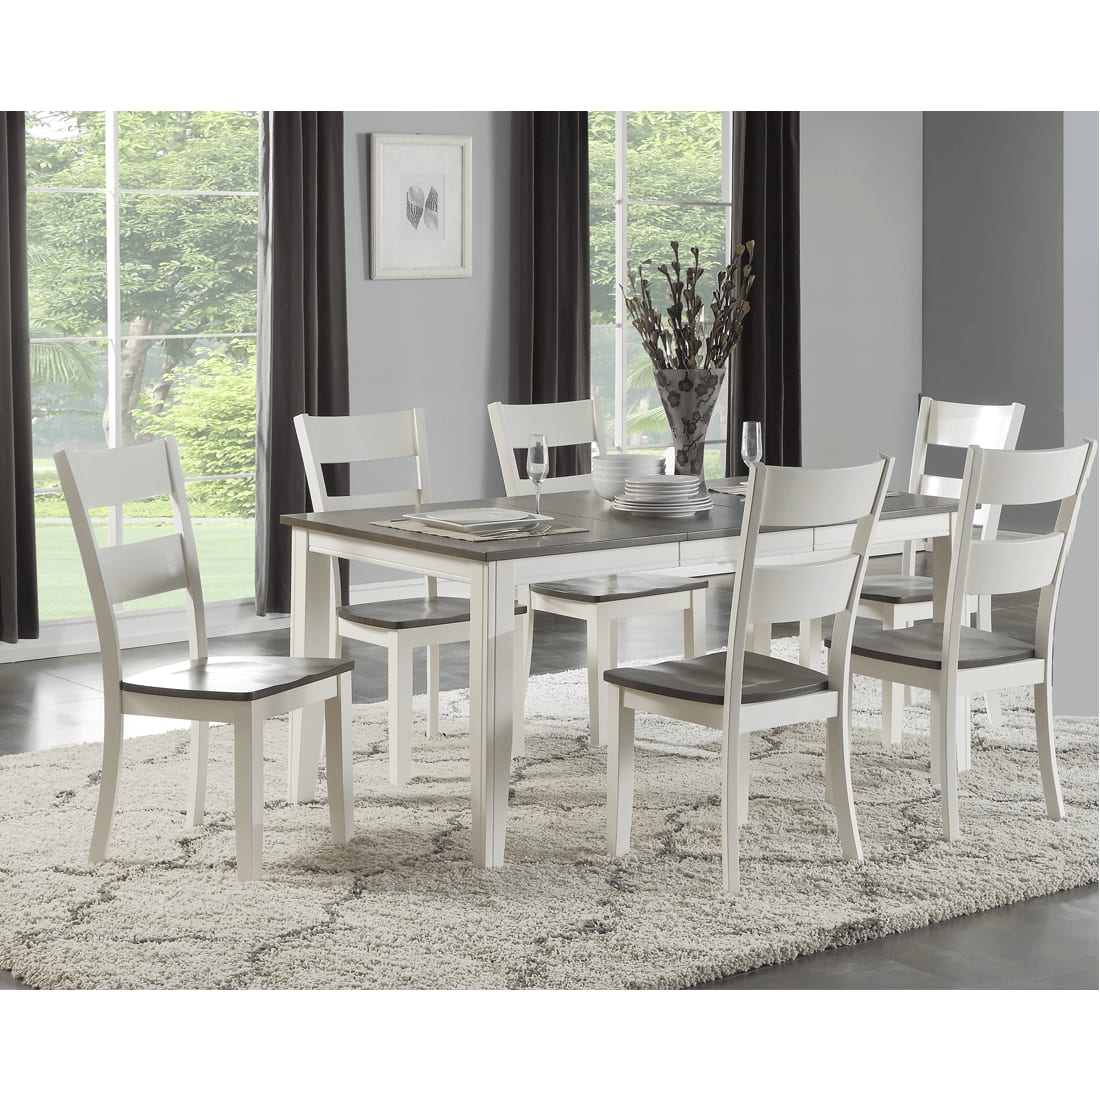 Triad White & Grey Collection Dining Set | Conn's HomePlus